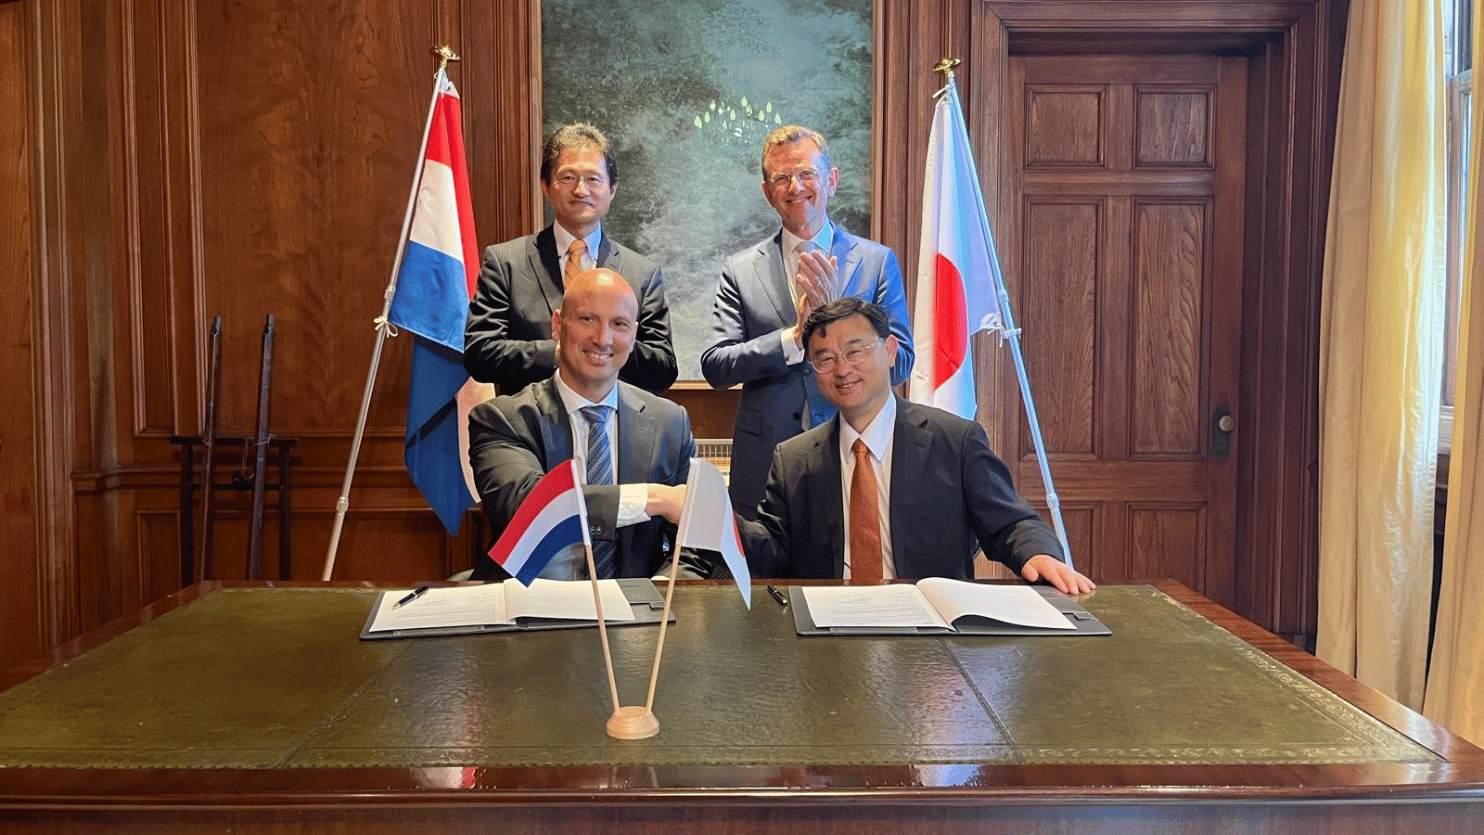 Takehiko Nagumo, Director of Smart City Institute Japan, and TNO's CEO Tjark Tjin-A-Tsoi signed an MoU with the aim to make the Sustainable Wellbeing indicators applicable for cities using Urban Strategy.